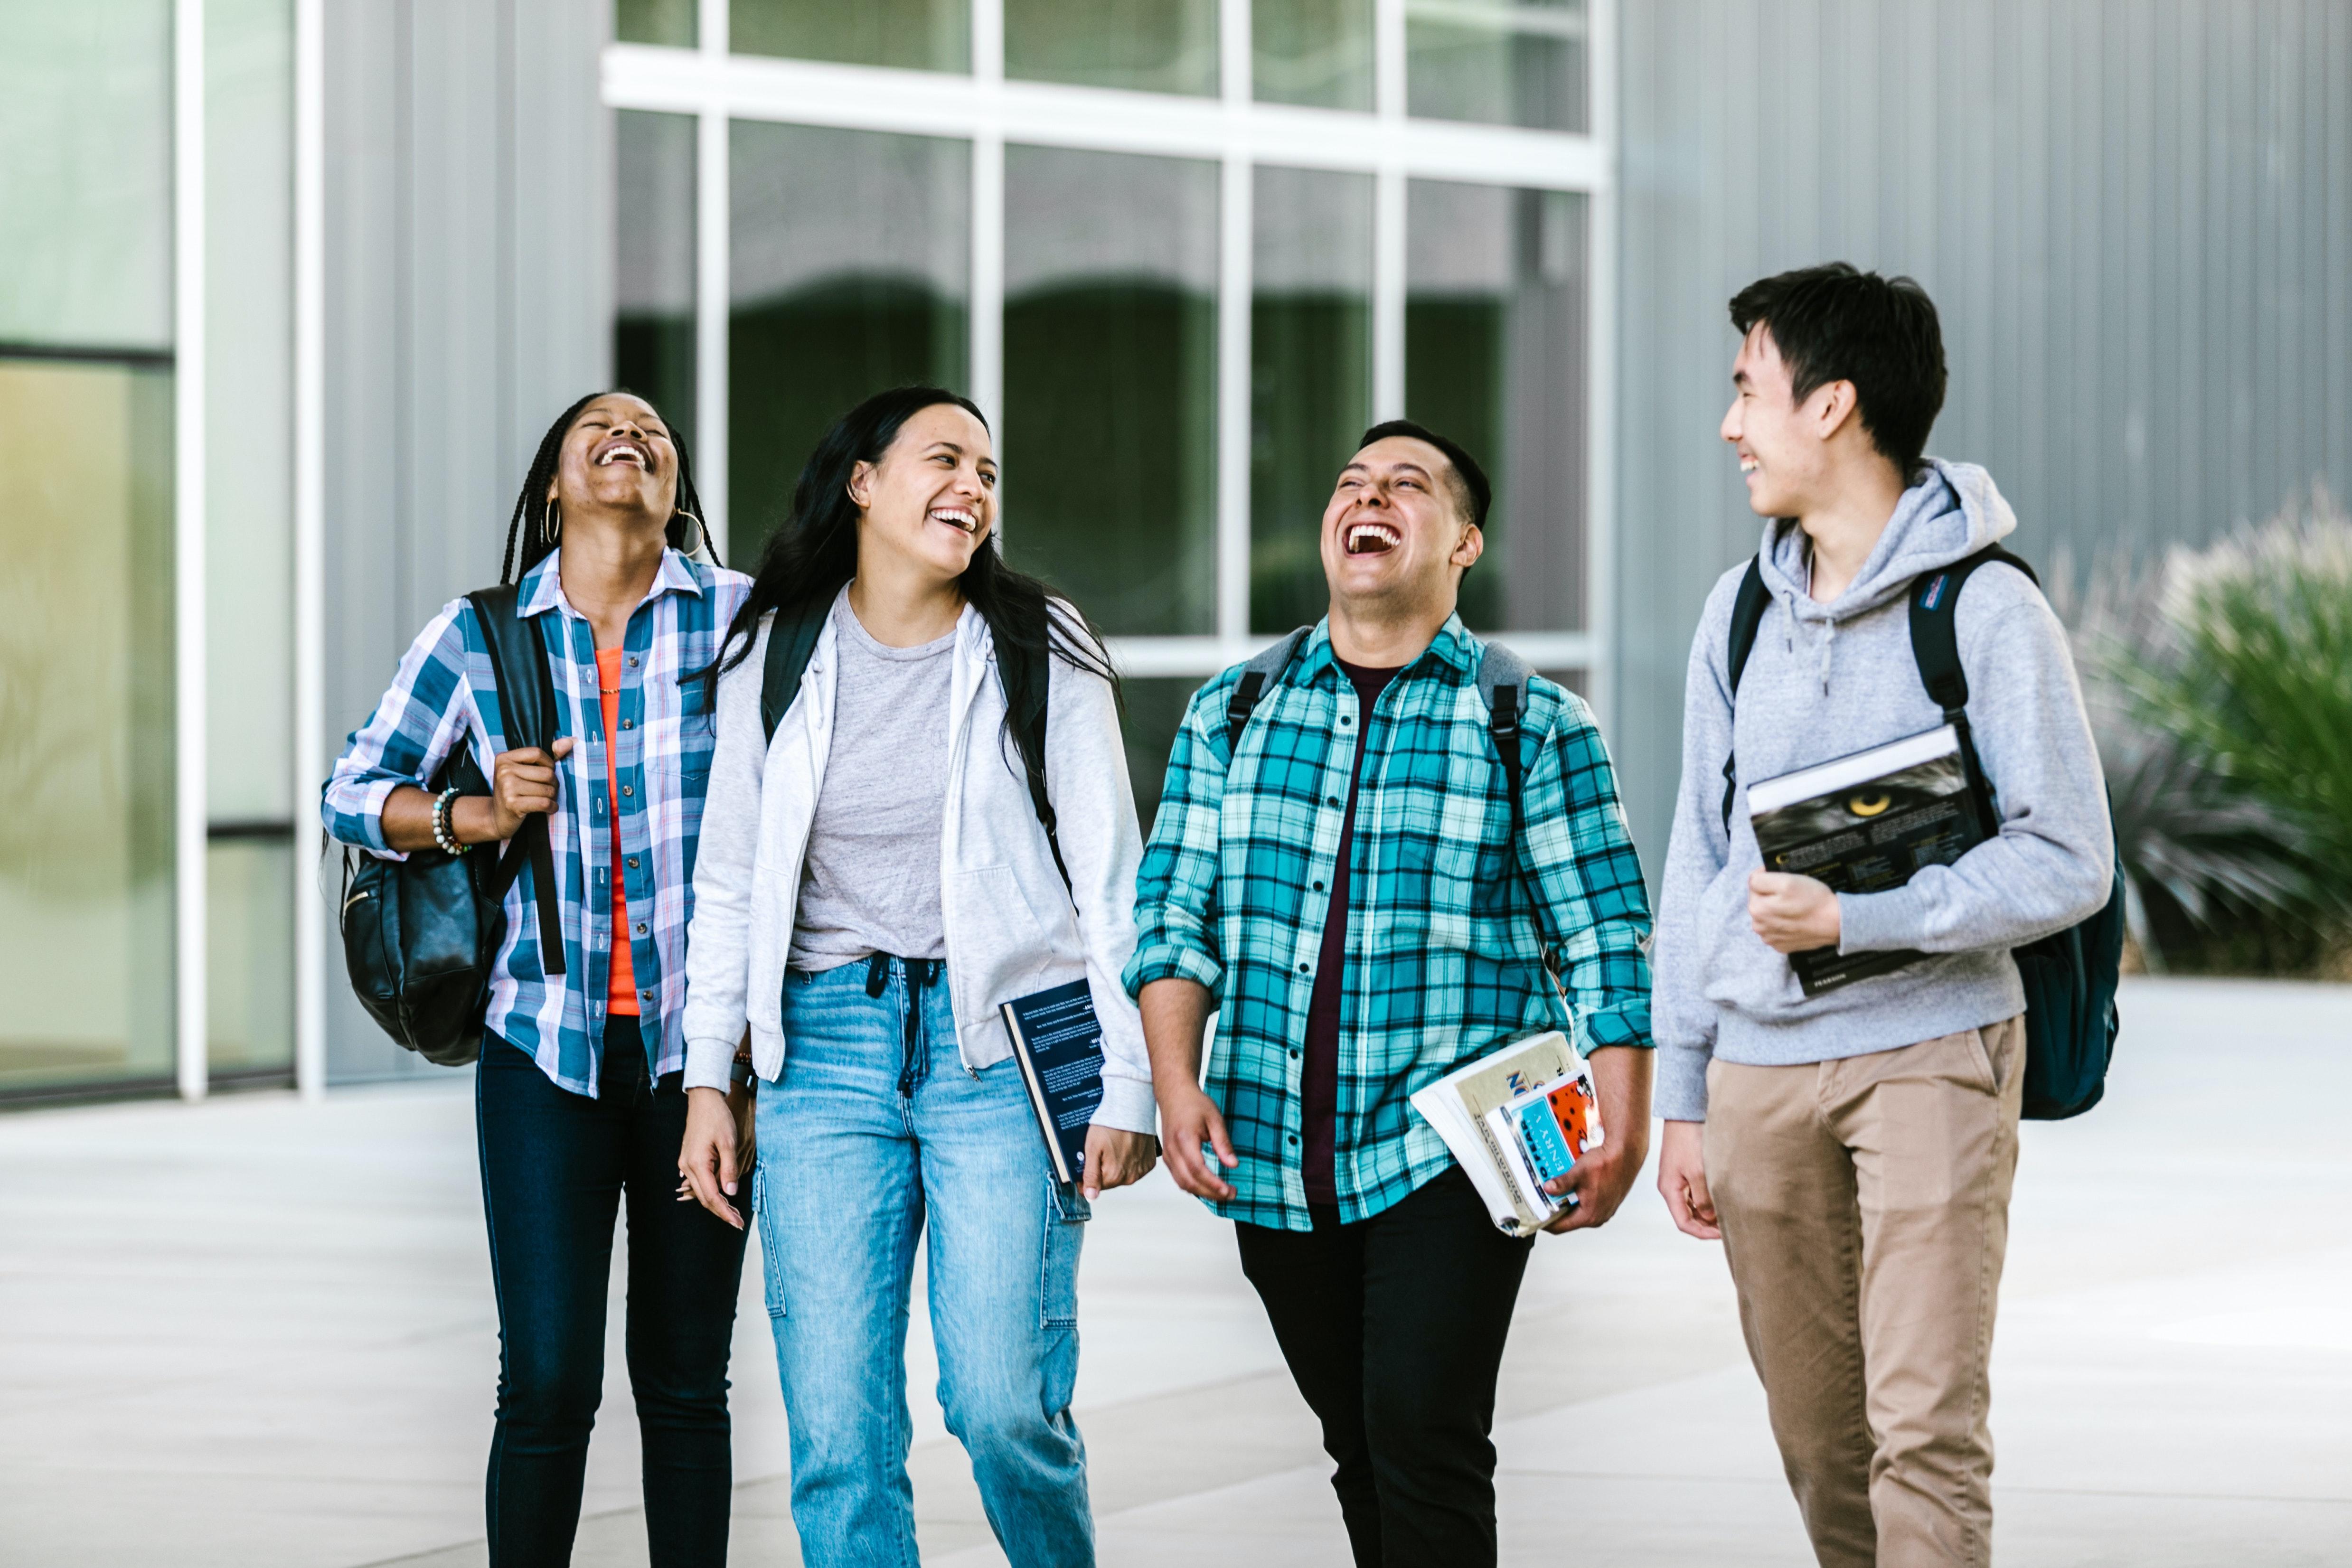 A group of students laughing while walking across a college campus.